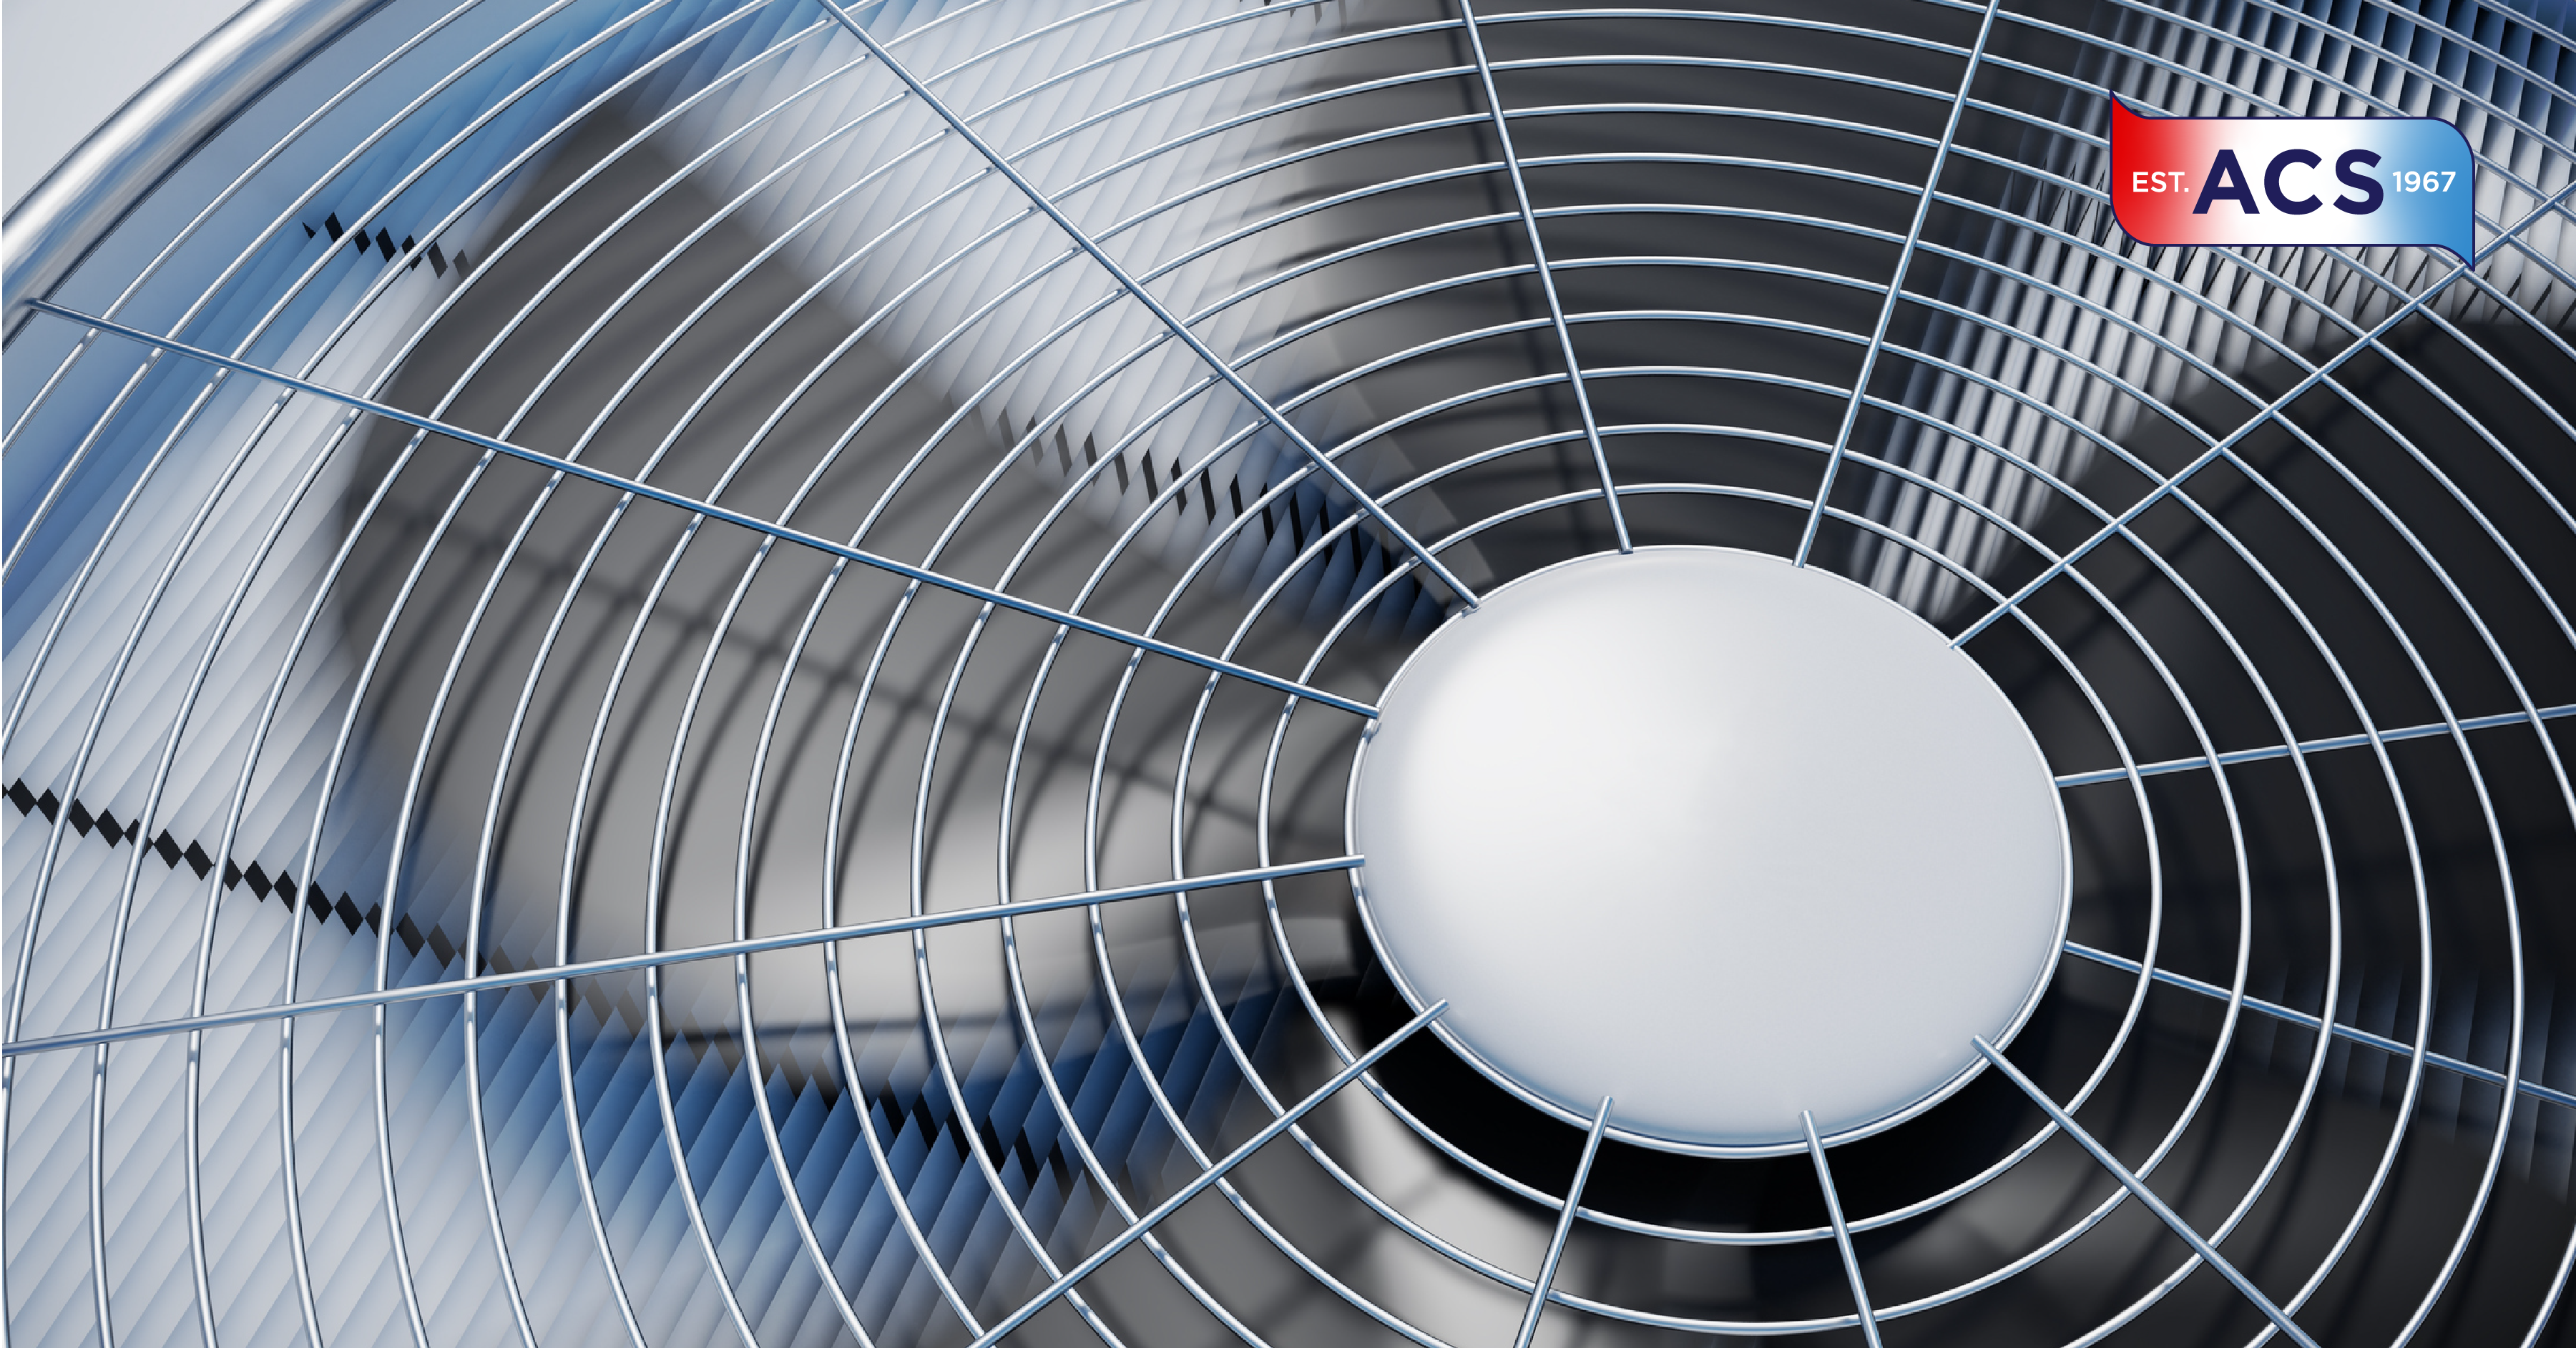 A close-up of the propeller of a moving air conditioning unit